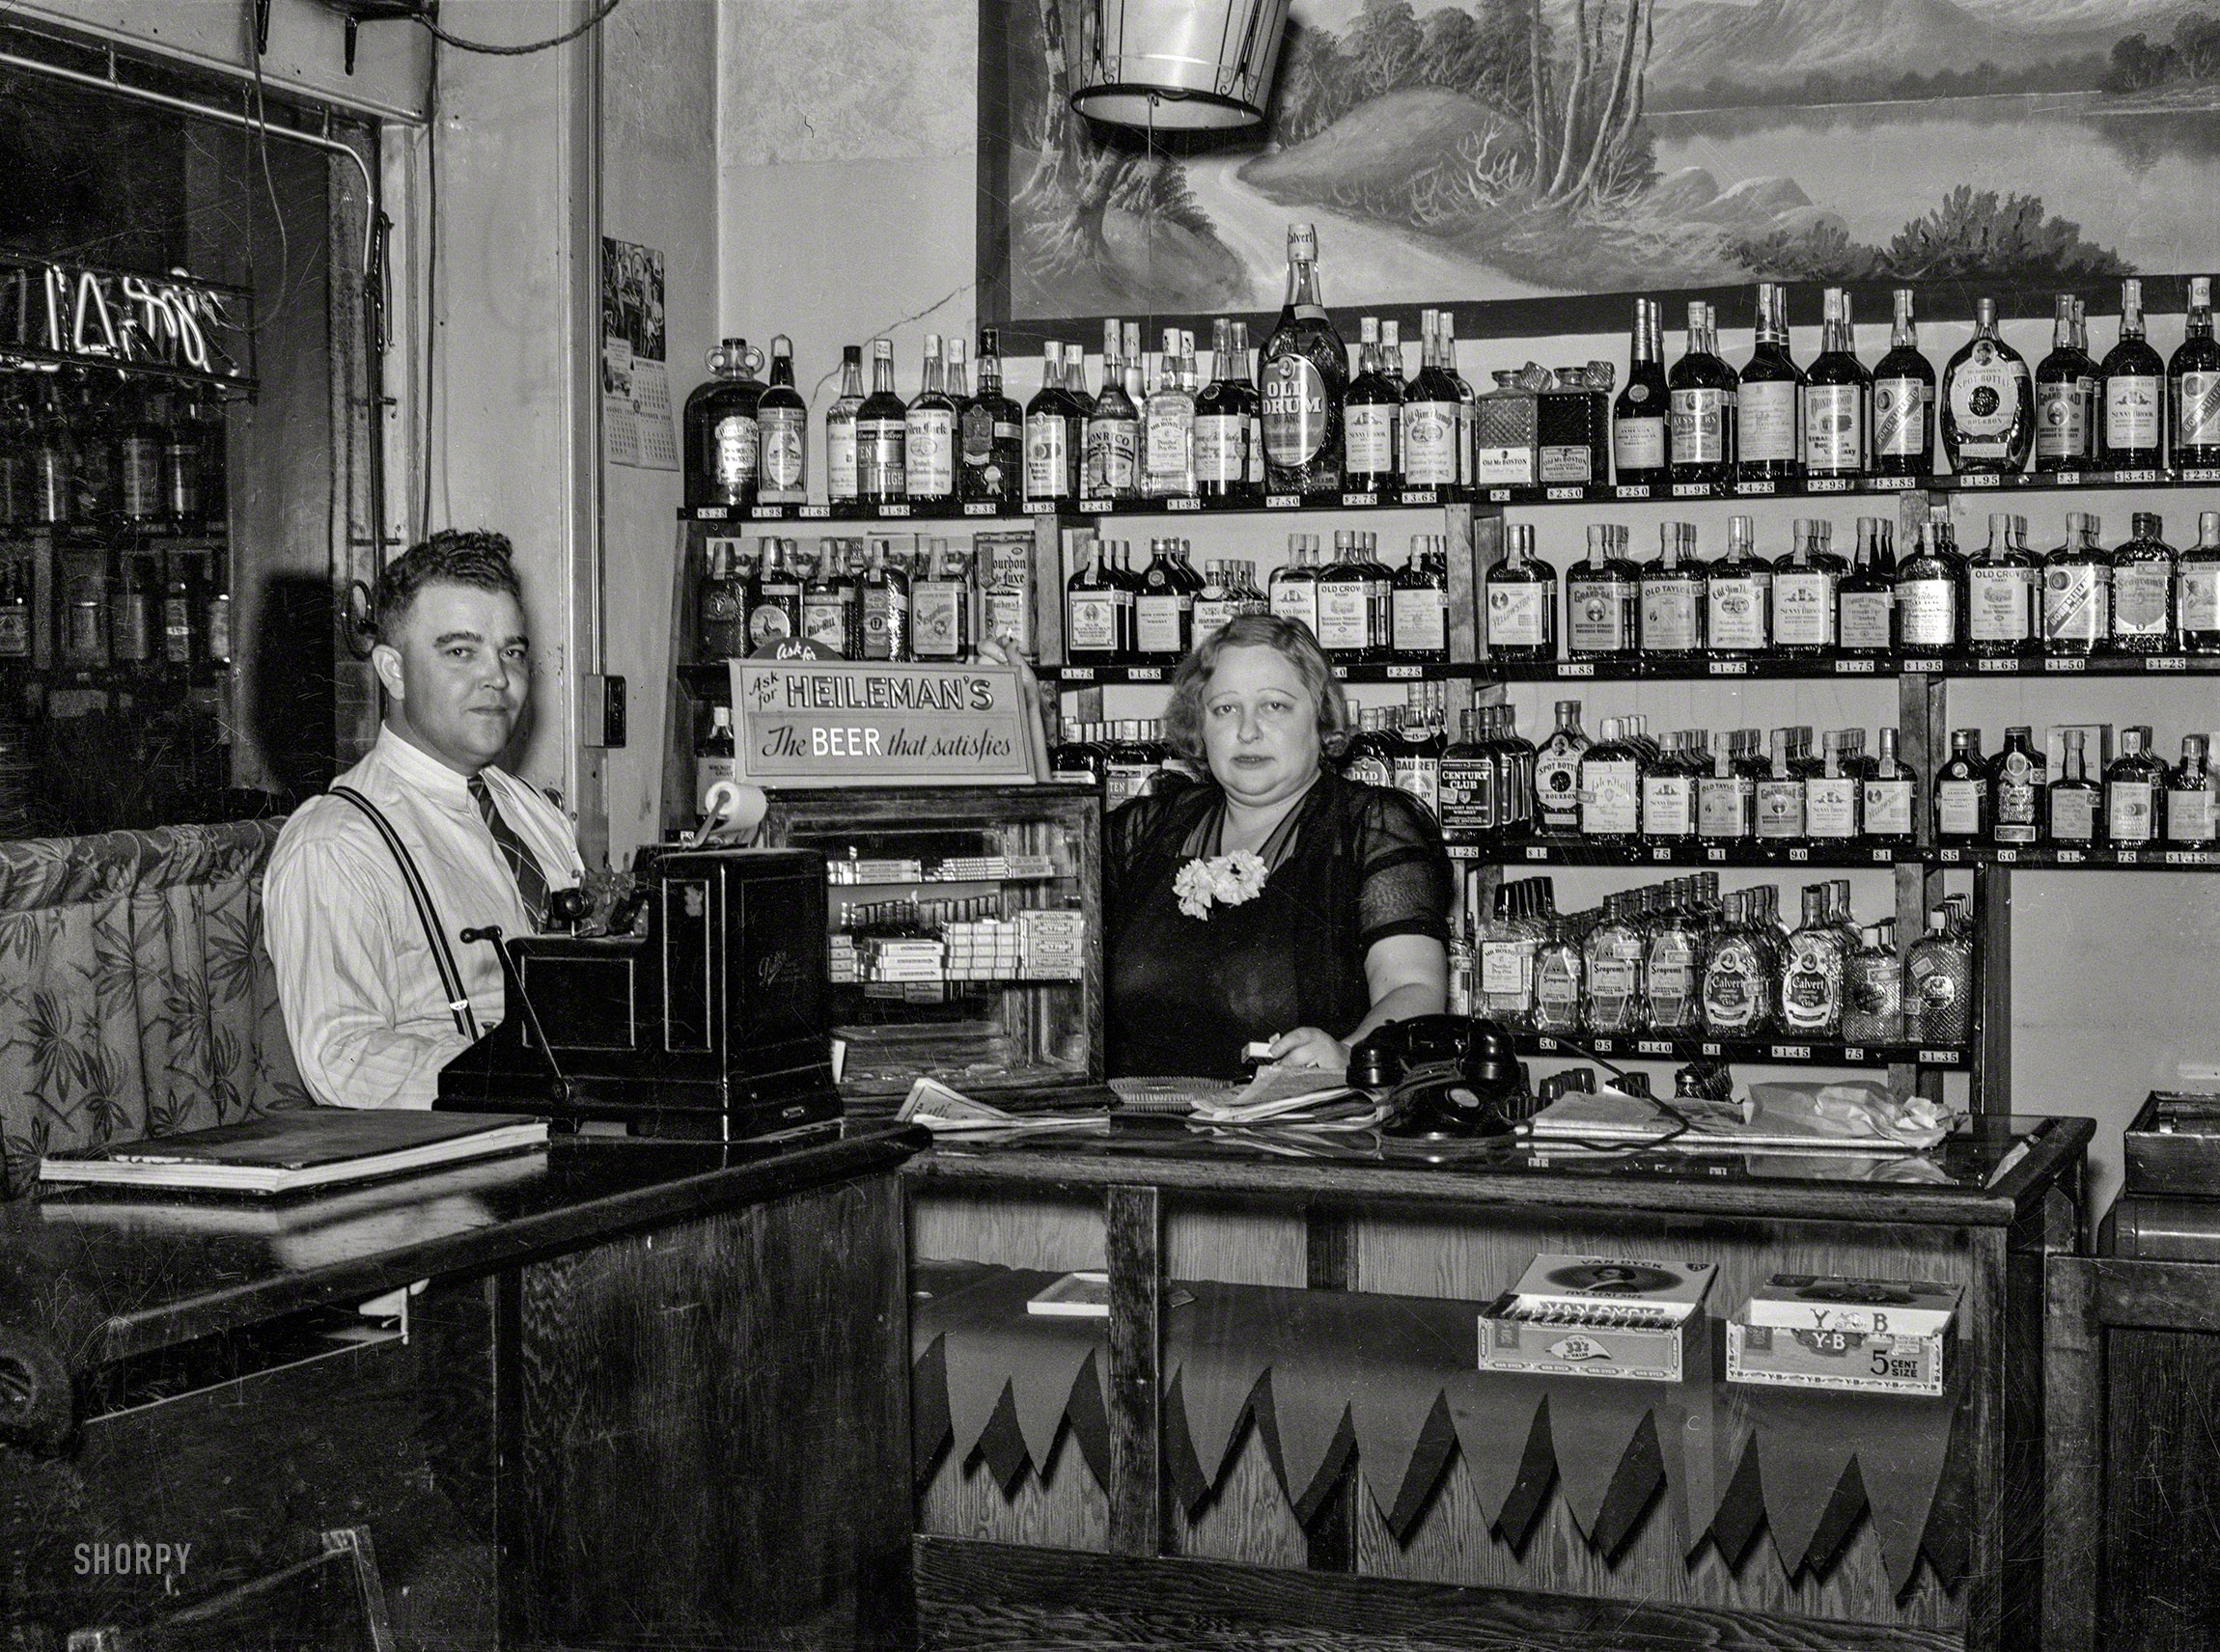 October 1938. North Platte, Nebraska. "Manager of the Alamo bar, and Mildred Irwin, entertainer." The saloon singer last seen here. Medium format negative by John Vachon for the Resettlement Administration. View full size.